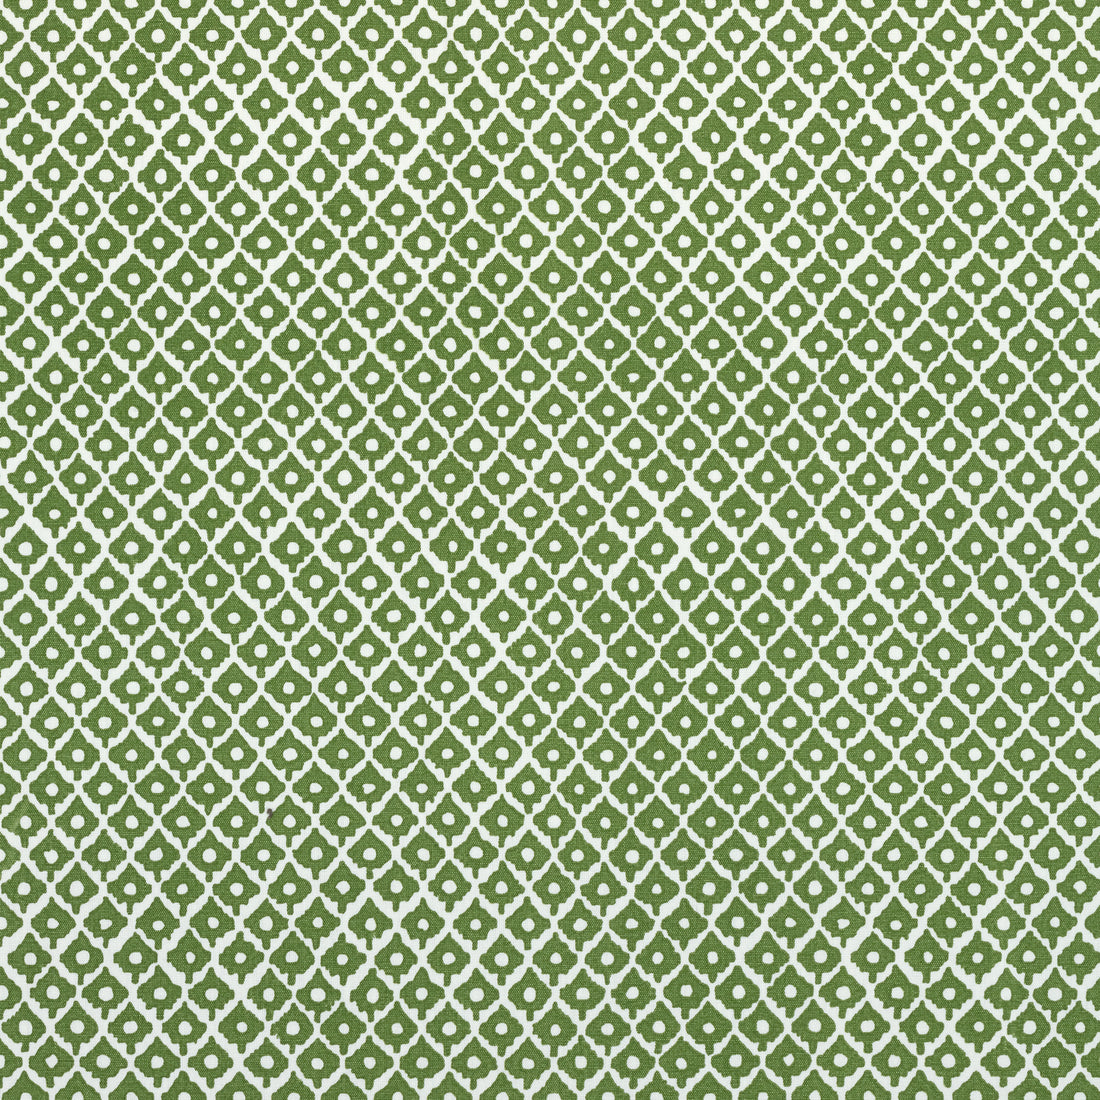 Petit Arbre fabric in green on white  color - pattern number AF9629 - by Anna French in the Savoy collection